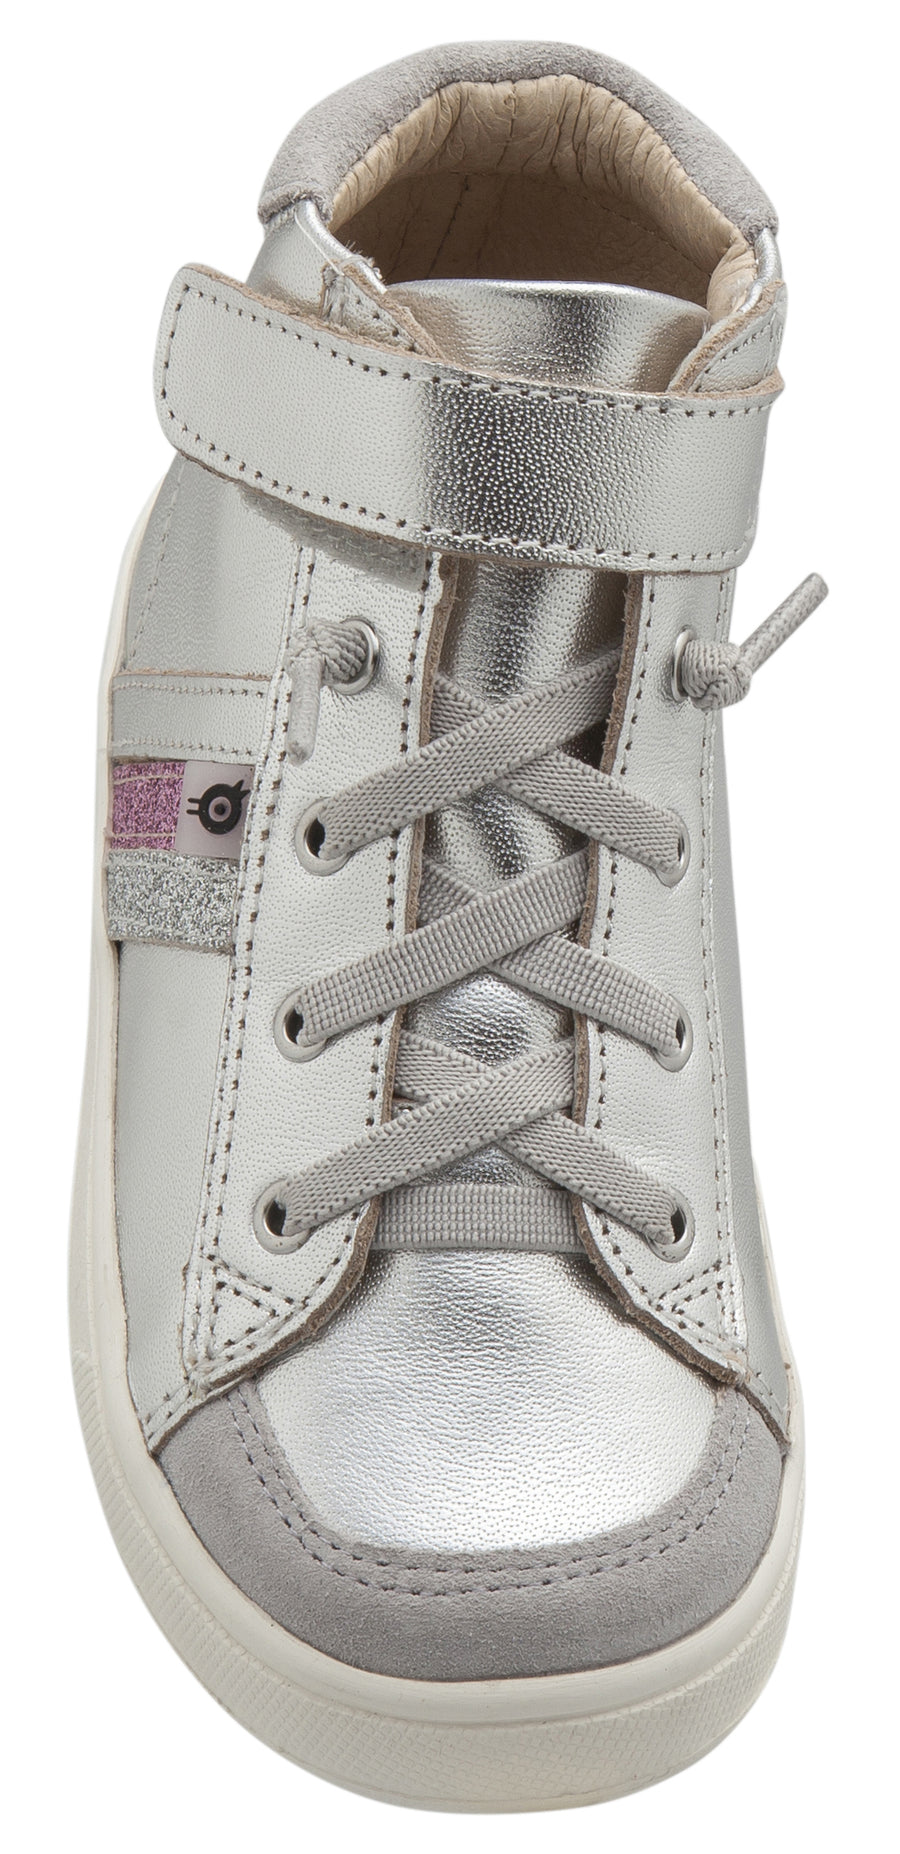 Old Soles Girl's  Glambo High Top Leather Sneakers,Silver/Glam Argent/Glam Pink/Silver